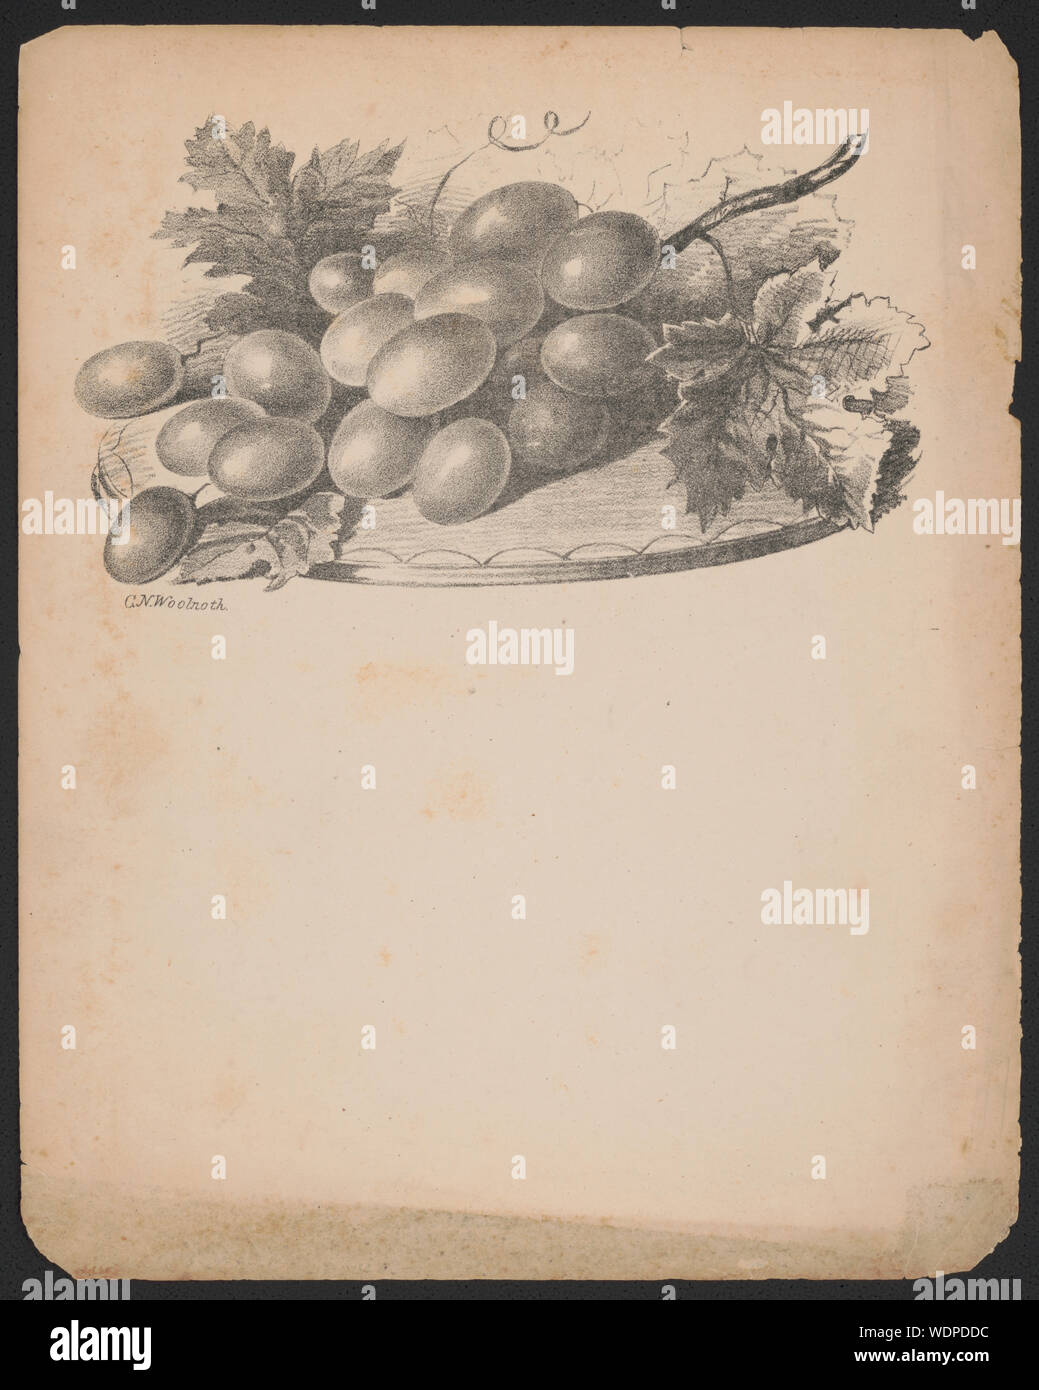 Grapes and flowers] / C.N. Woolnoth Abstract/medium: 2 prints (1 sheet) : lithograph  sheet 20.8 x 16.7 cm. Stock Photo